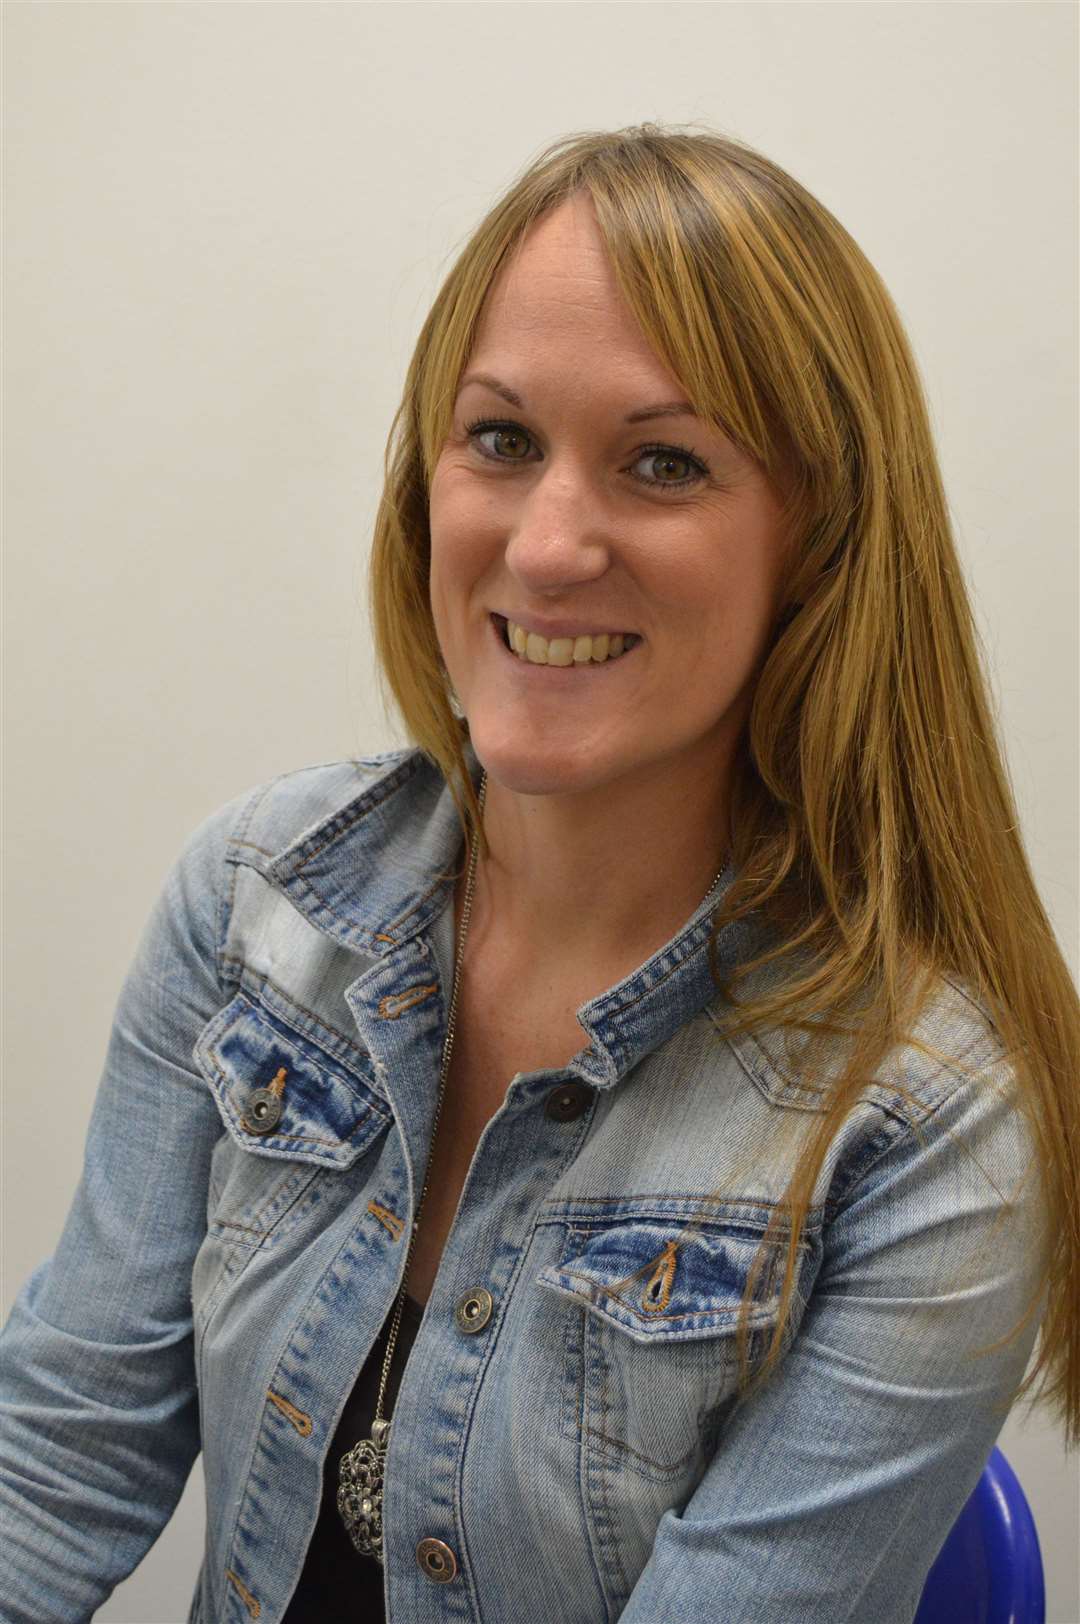 Goodwin Academy teacher Kirsty Gaythwaite has been shortlisted for the Outstanding New Teacher of the Year category of the Pearson National Teaching Awards. (33271639)